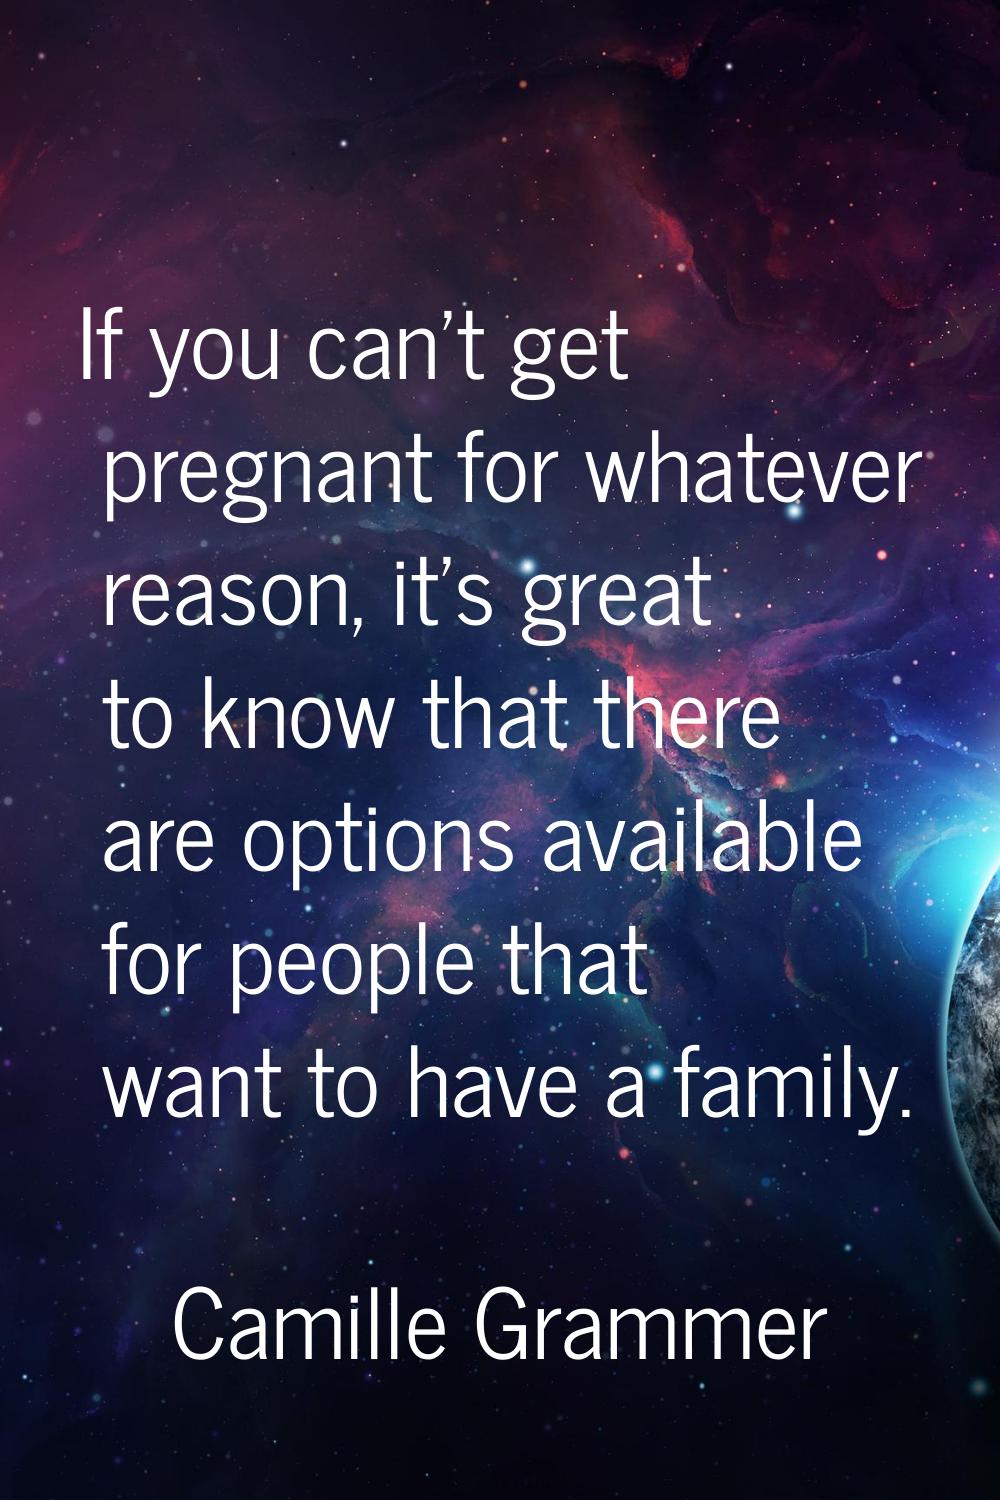 If you can't get pregnant for whatever reason, it's great to know that there are options available 